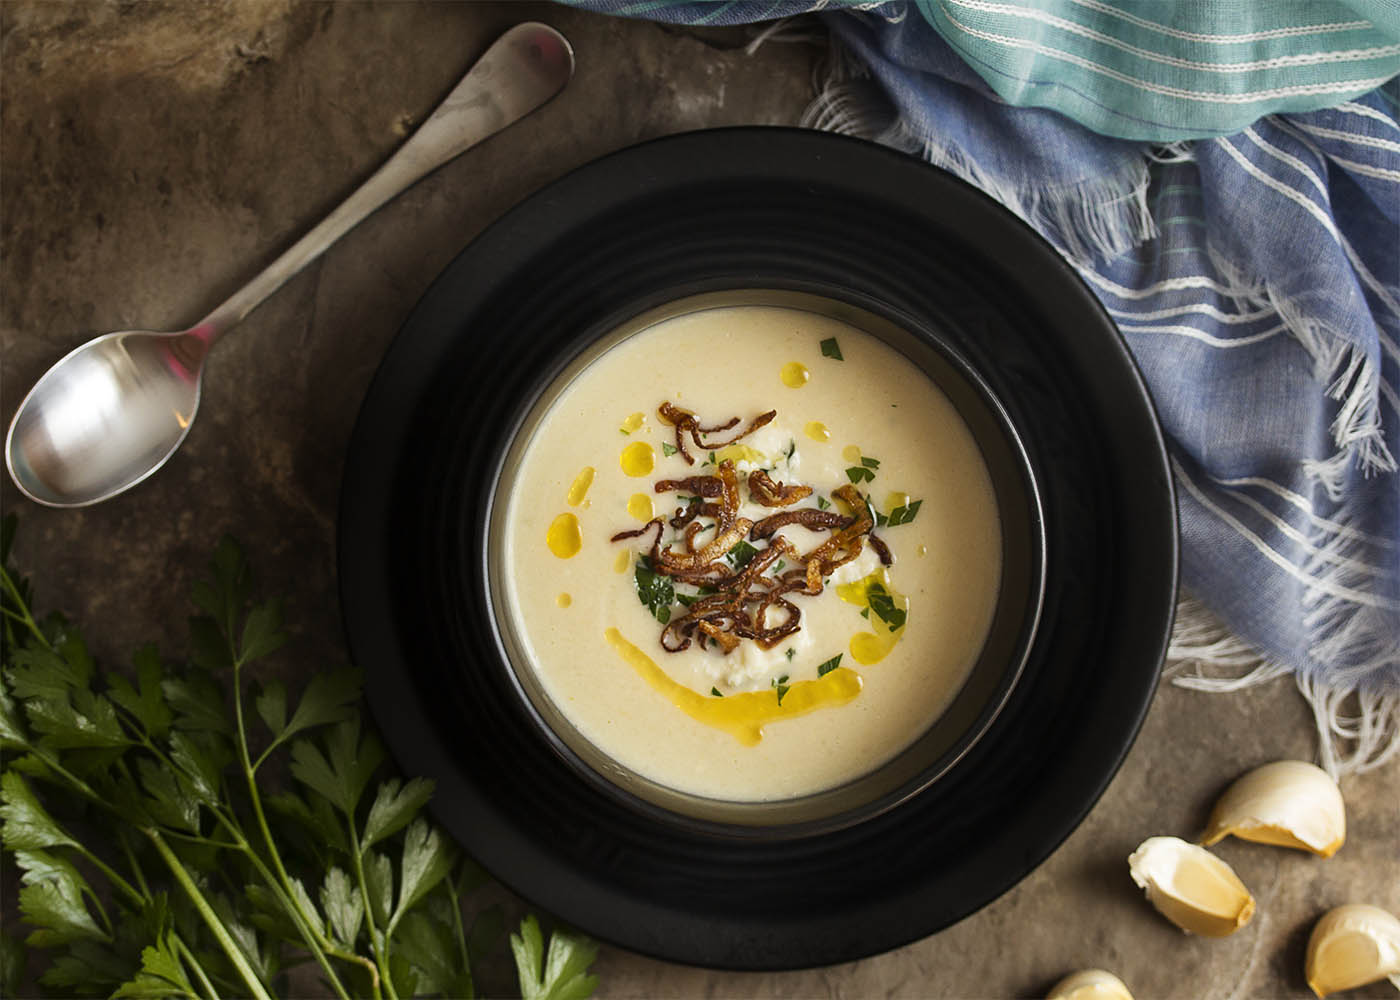 This smooth and creamy cauliflower soup is swirled with blue cheese and topped with truffle oil for great comfort food on a chilly day! | justalittlebitofbacon.com